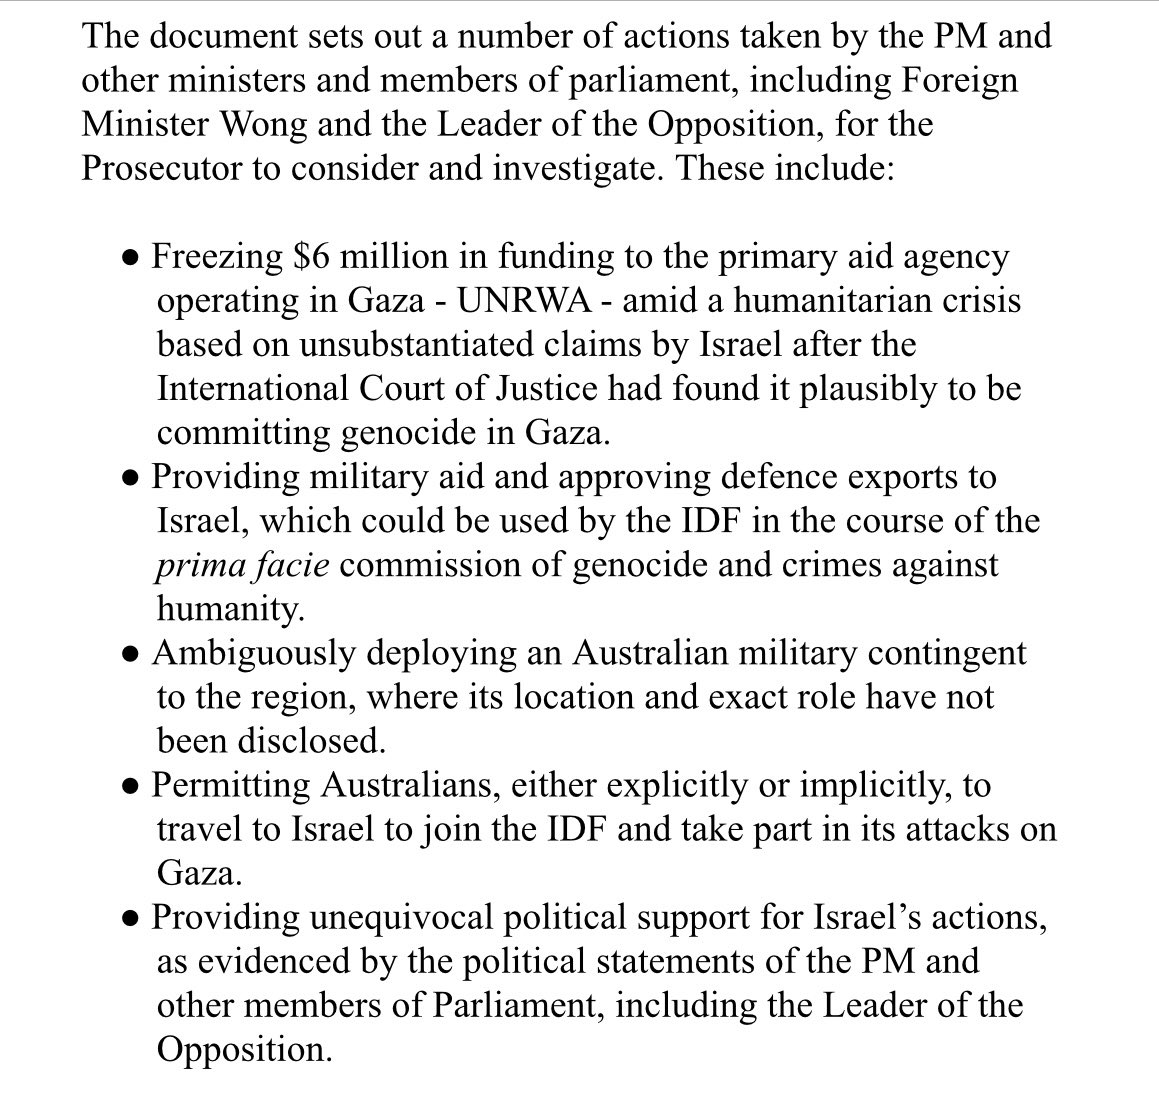 BREAKING: Prime Minister Anthony Albanese has been referred to the International Criminal Court as an accessory to genocide in Gaza making him the 1st leader of a Western nation referred to the ICC under Article 15 of the Rome Statute. 100+ Australian lawyers back this move